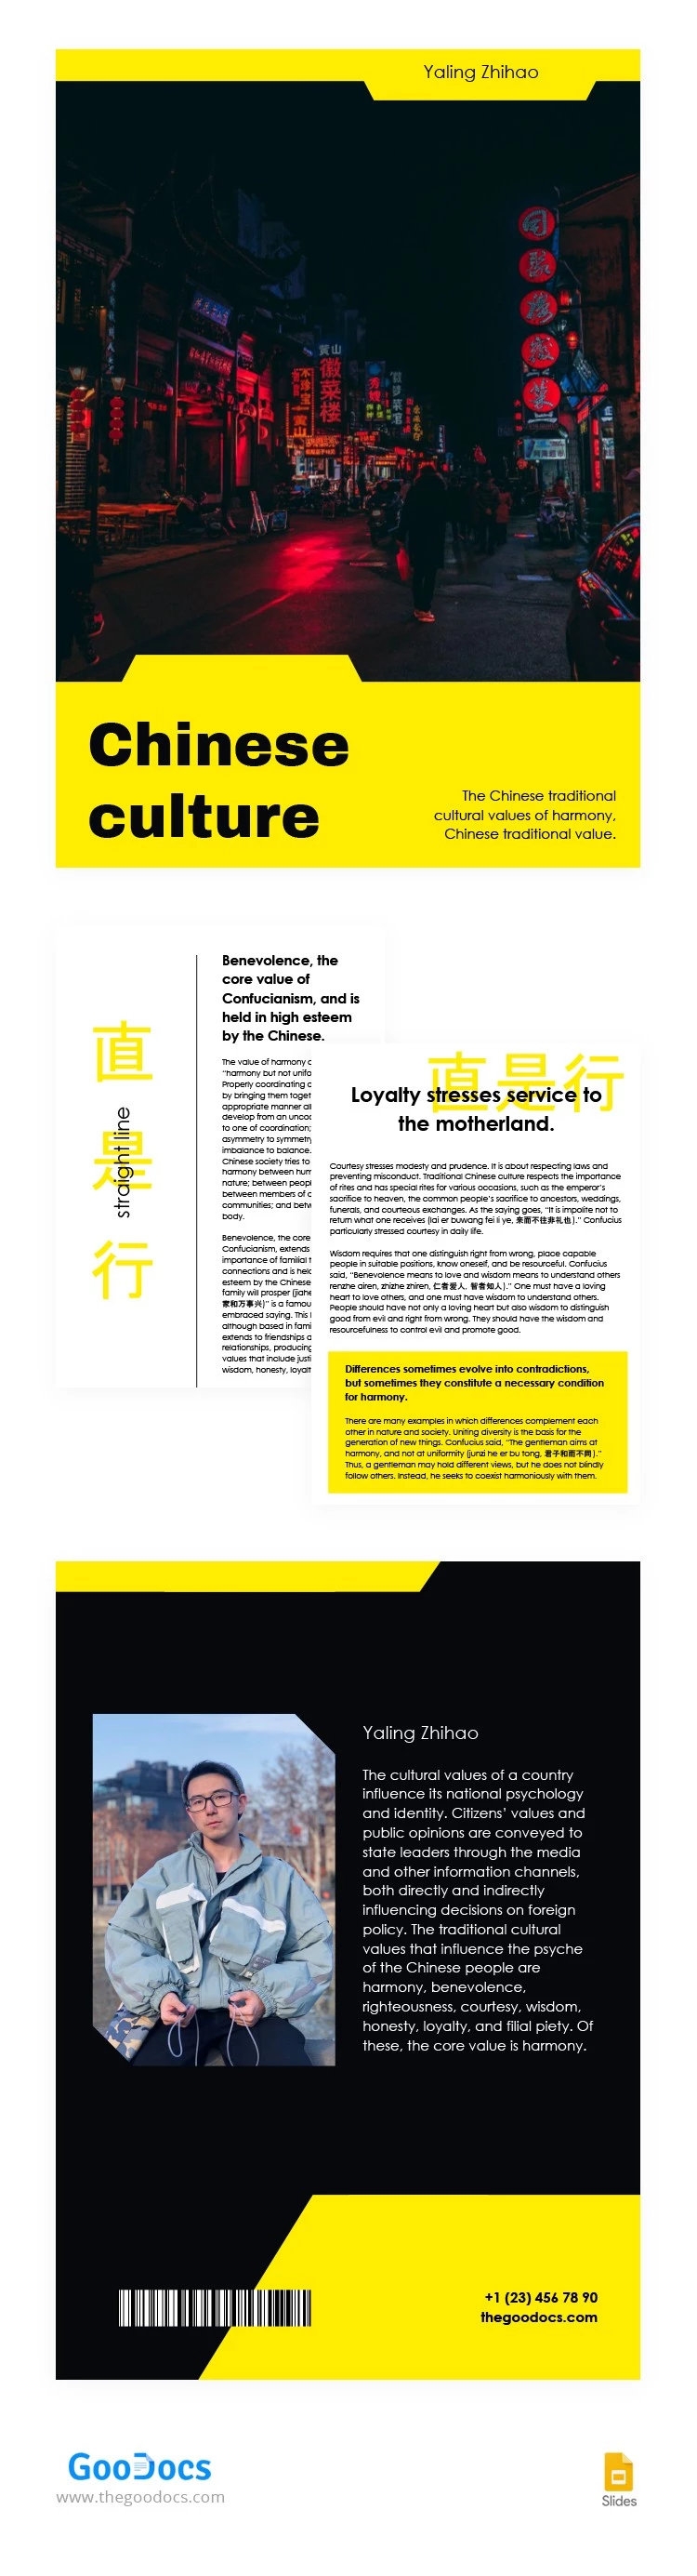 Chinese Culture Book - free Google Docs Template - 10063612